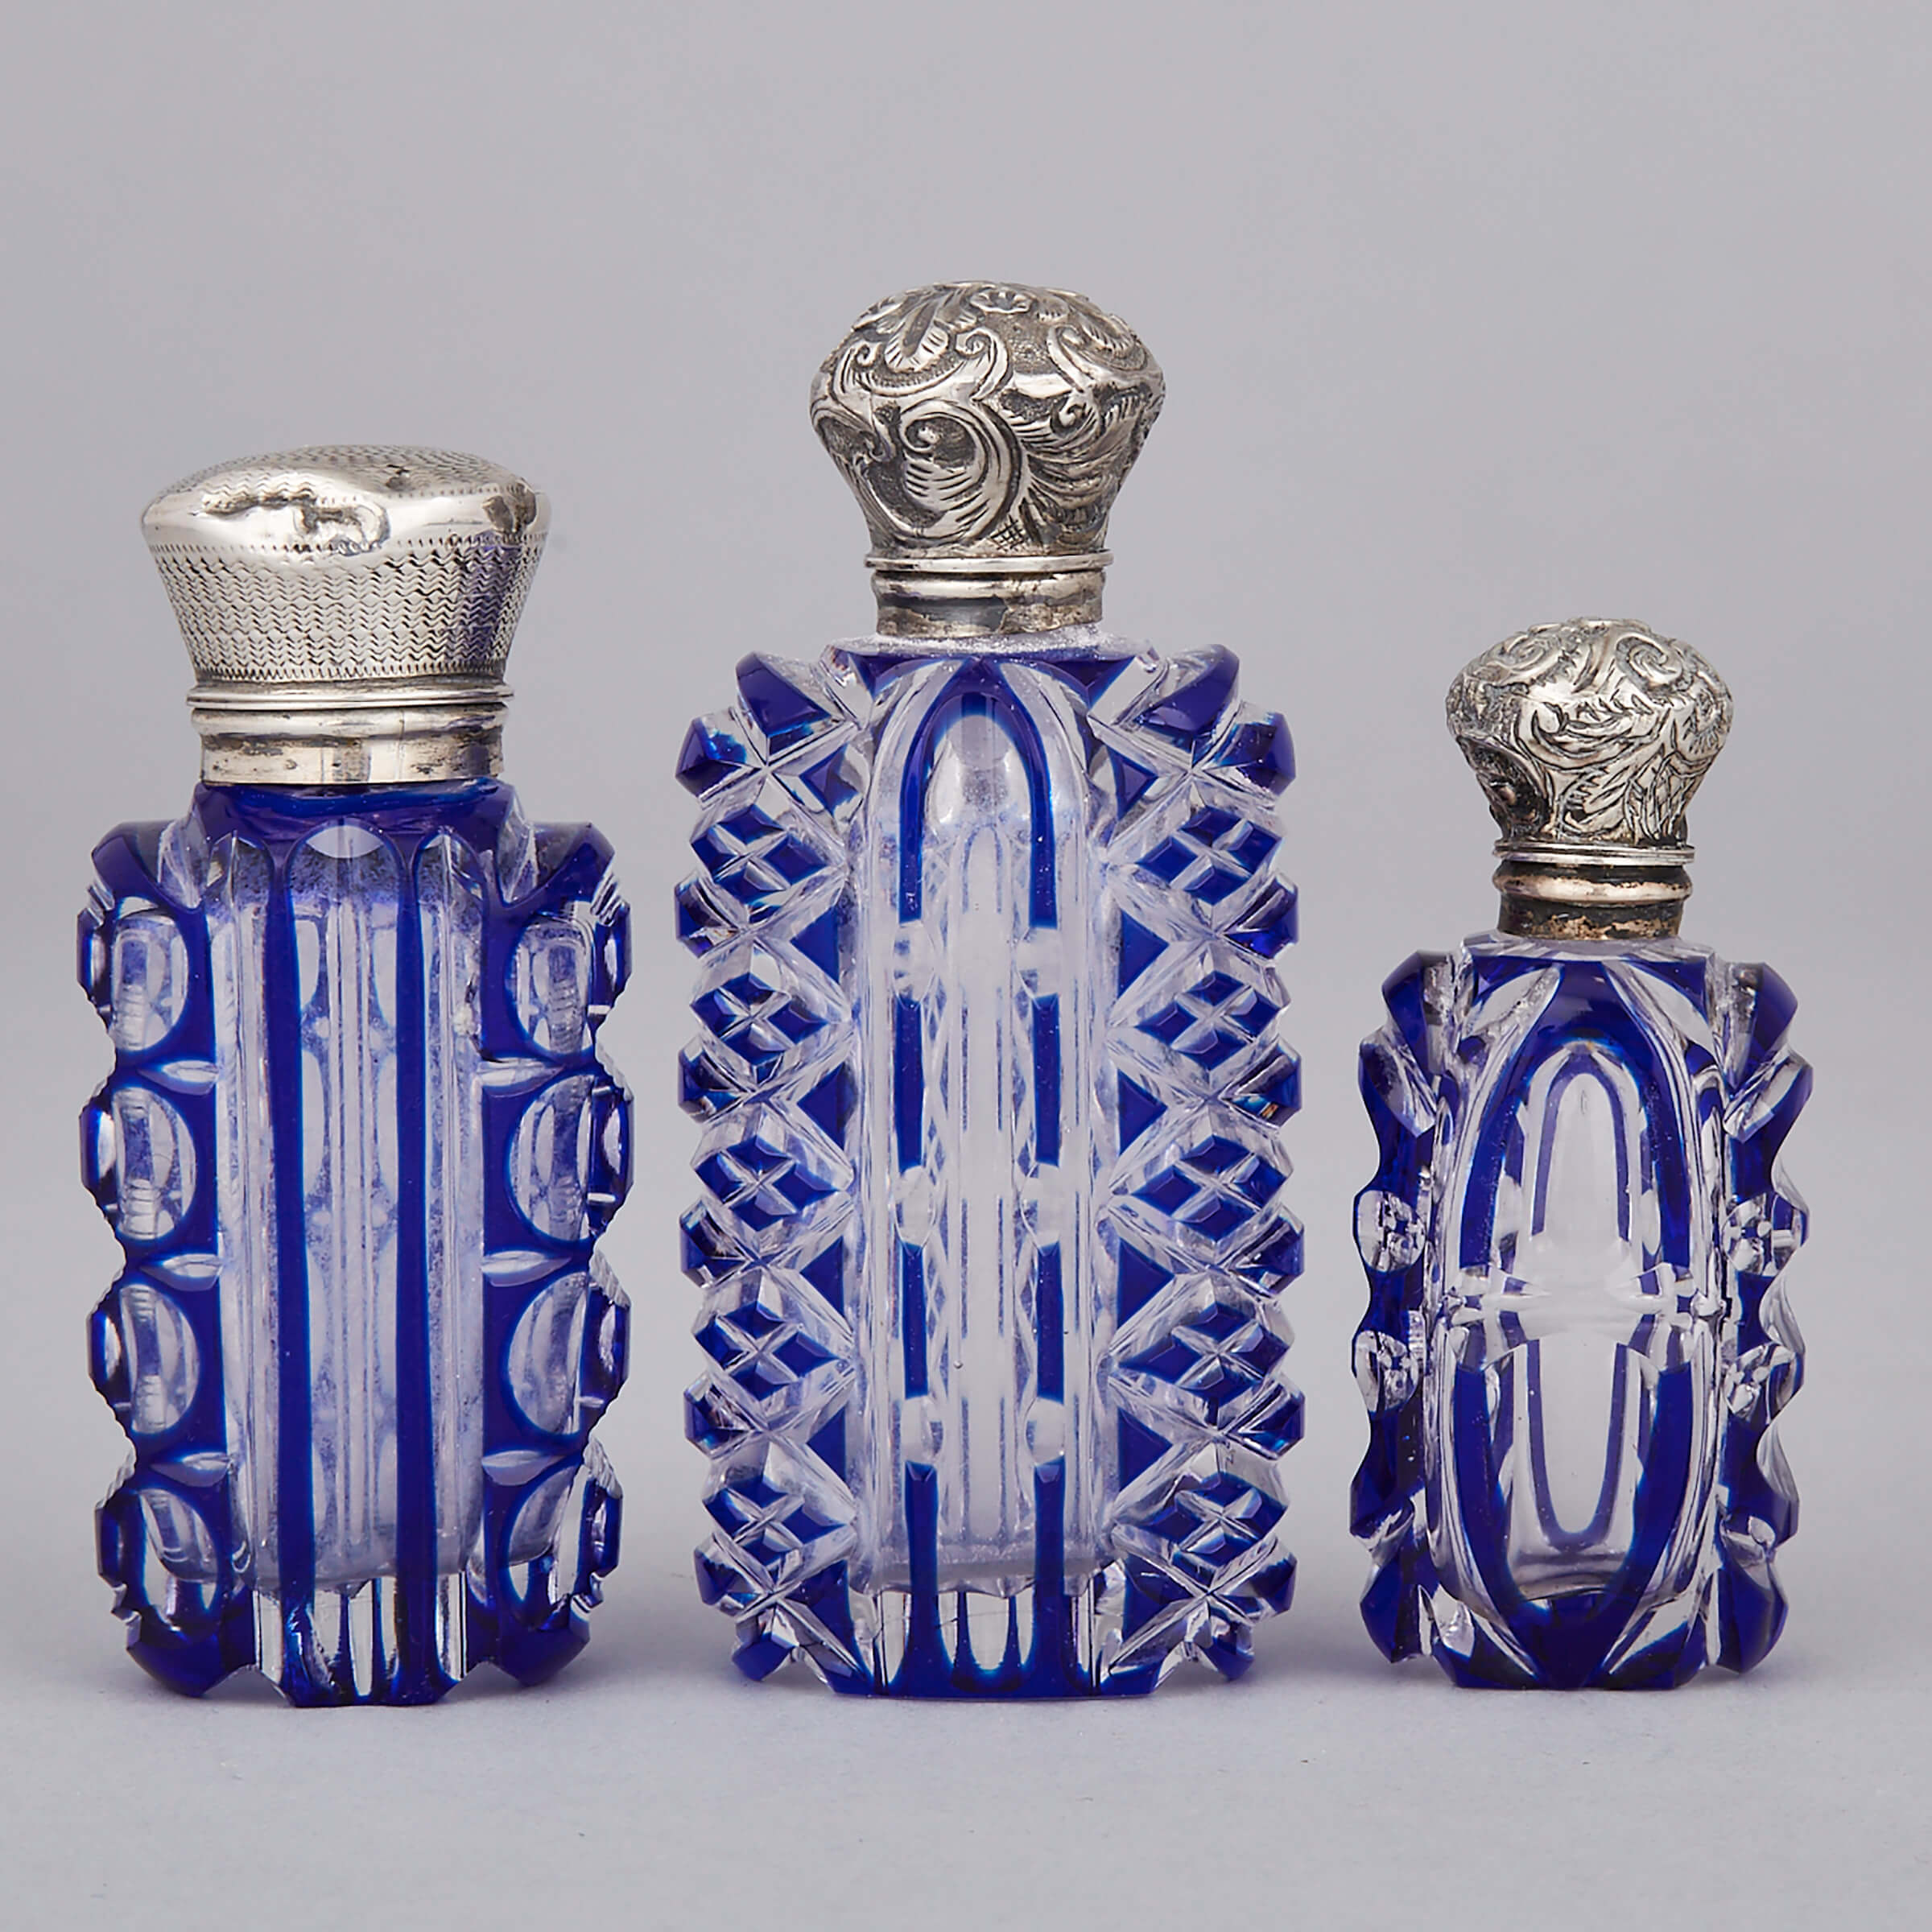 Three Silver Mounted Blue Overlaid and Cut Glass Perfume Bottles, late 19th century